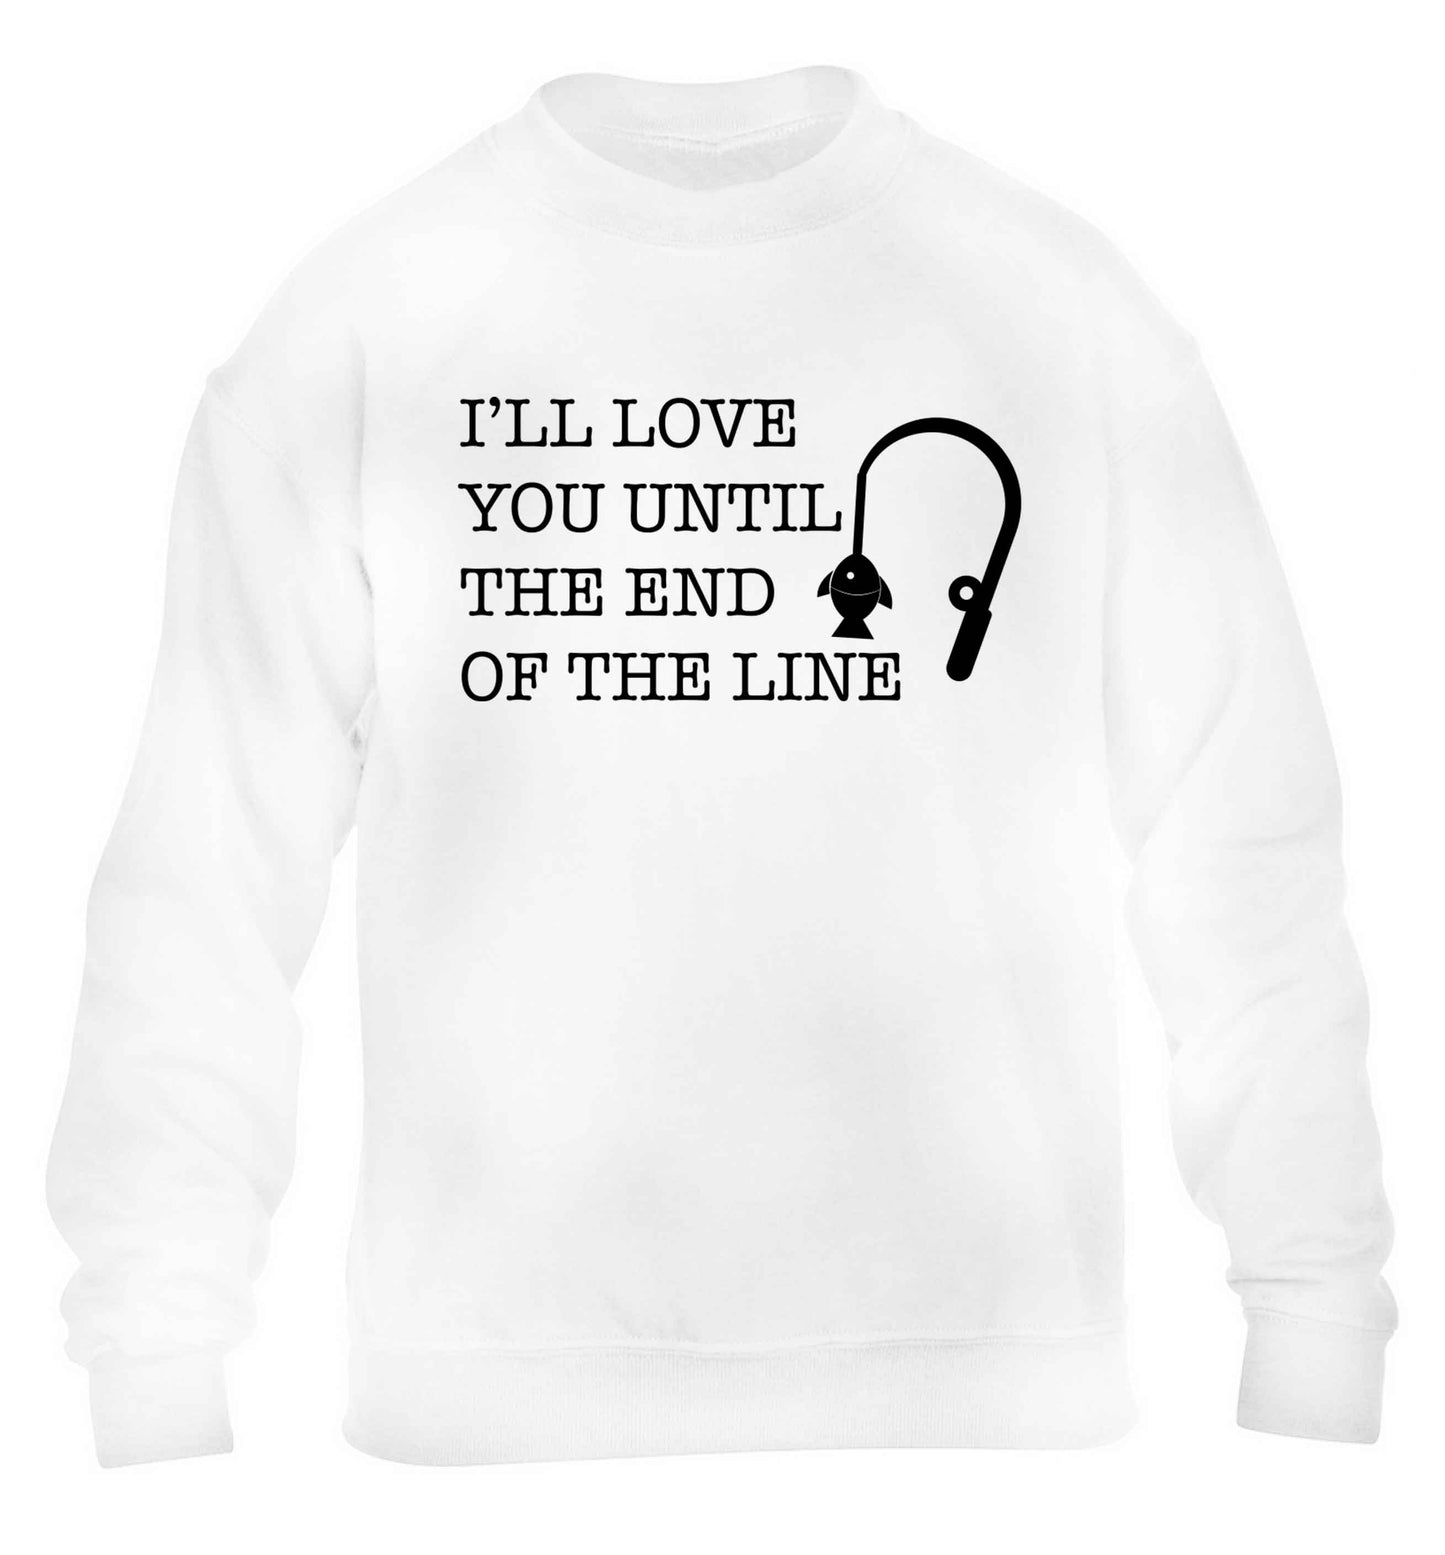 I'll love you until the end of the line children's white sweater 12-13 Years